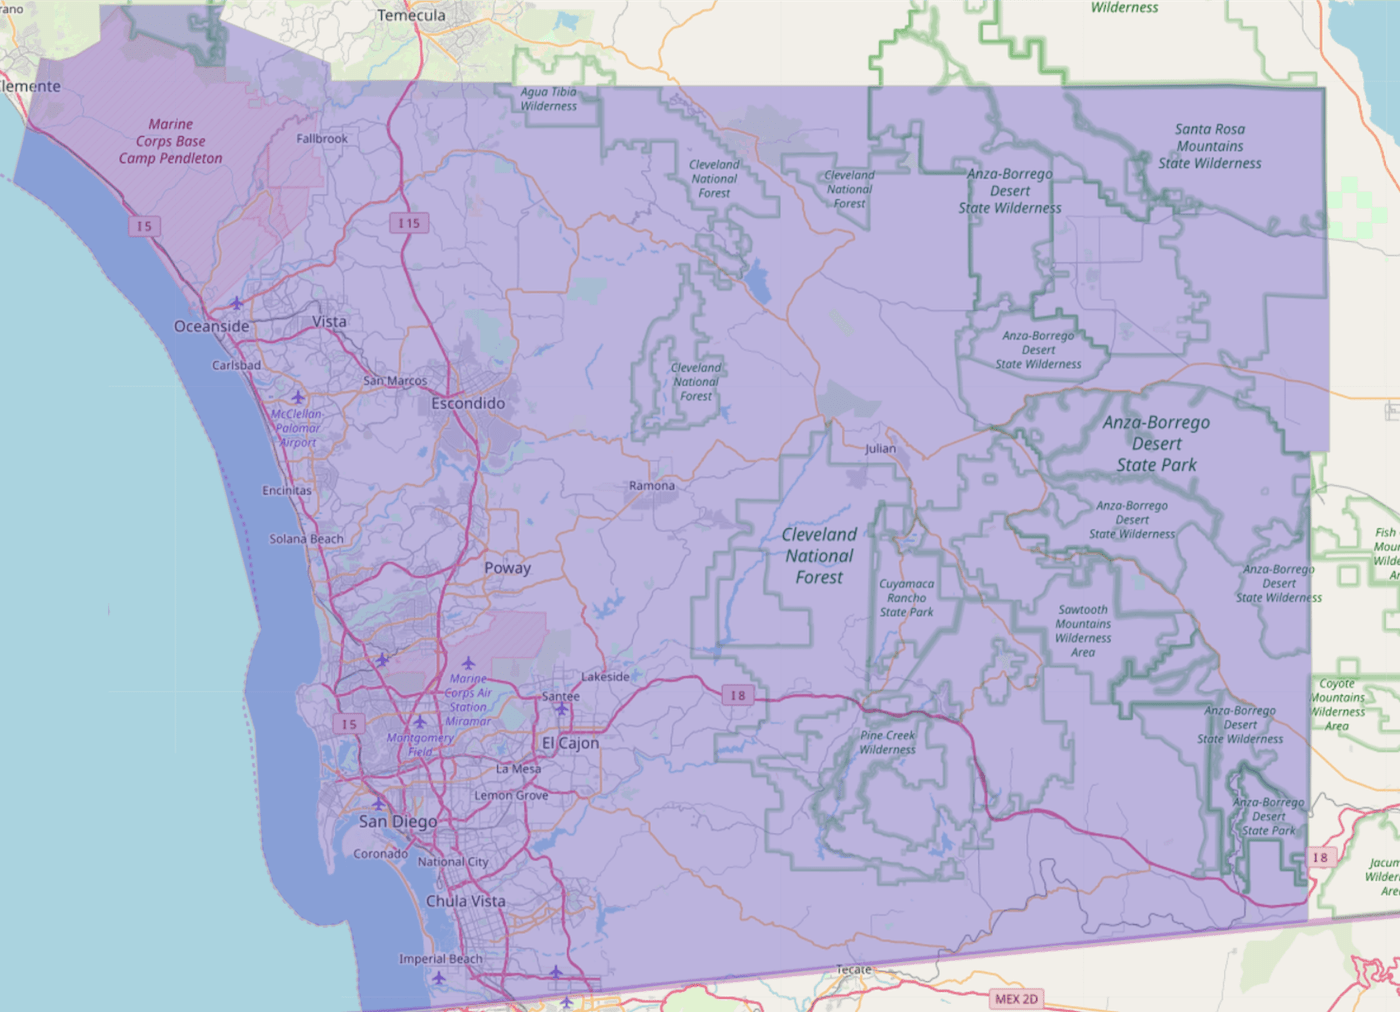 San Diego Zip Codes Map Maping Resources